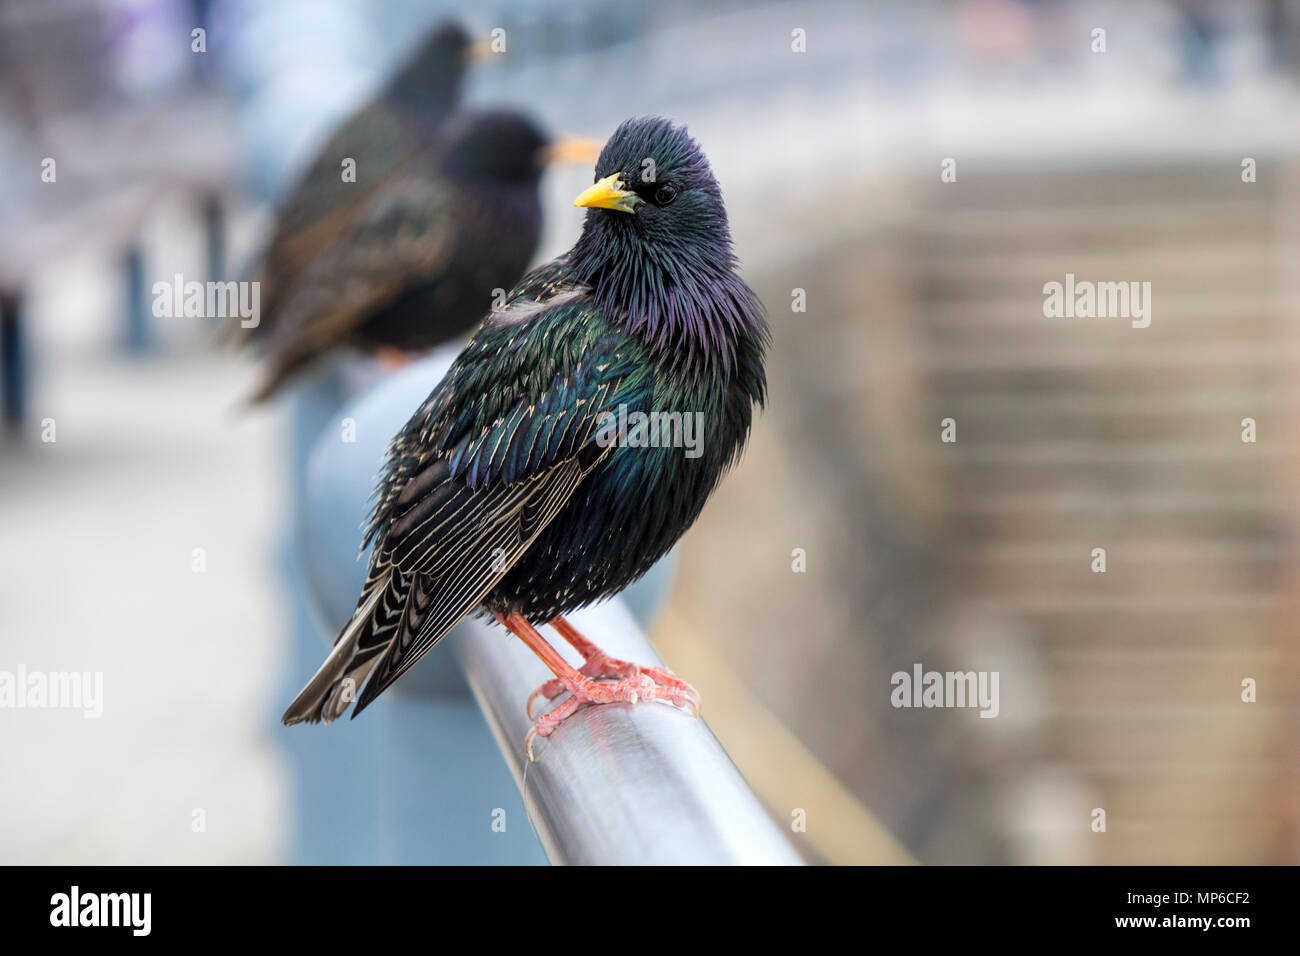 Common Starling (Sturnus vulgaris) Perched on a Handrail in an Urban Setting, UK Stock Photo